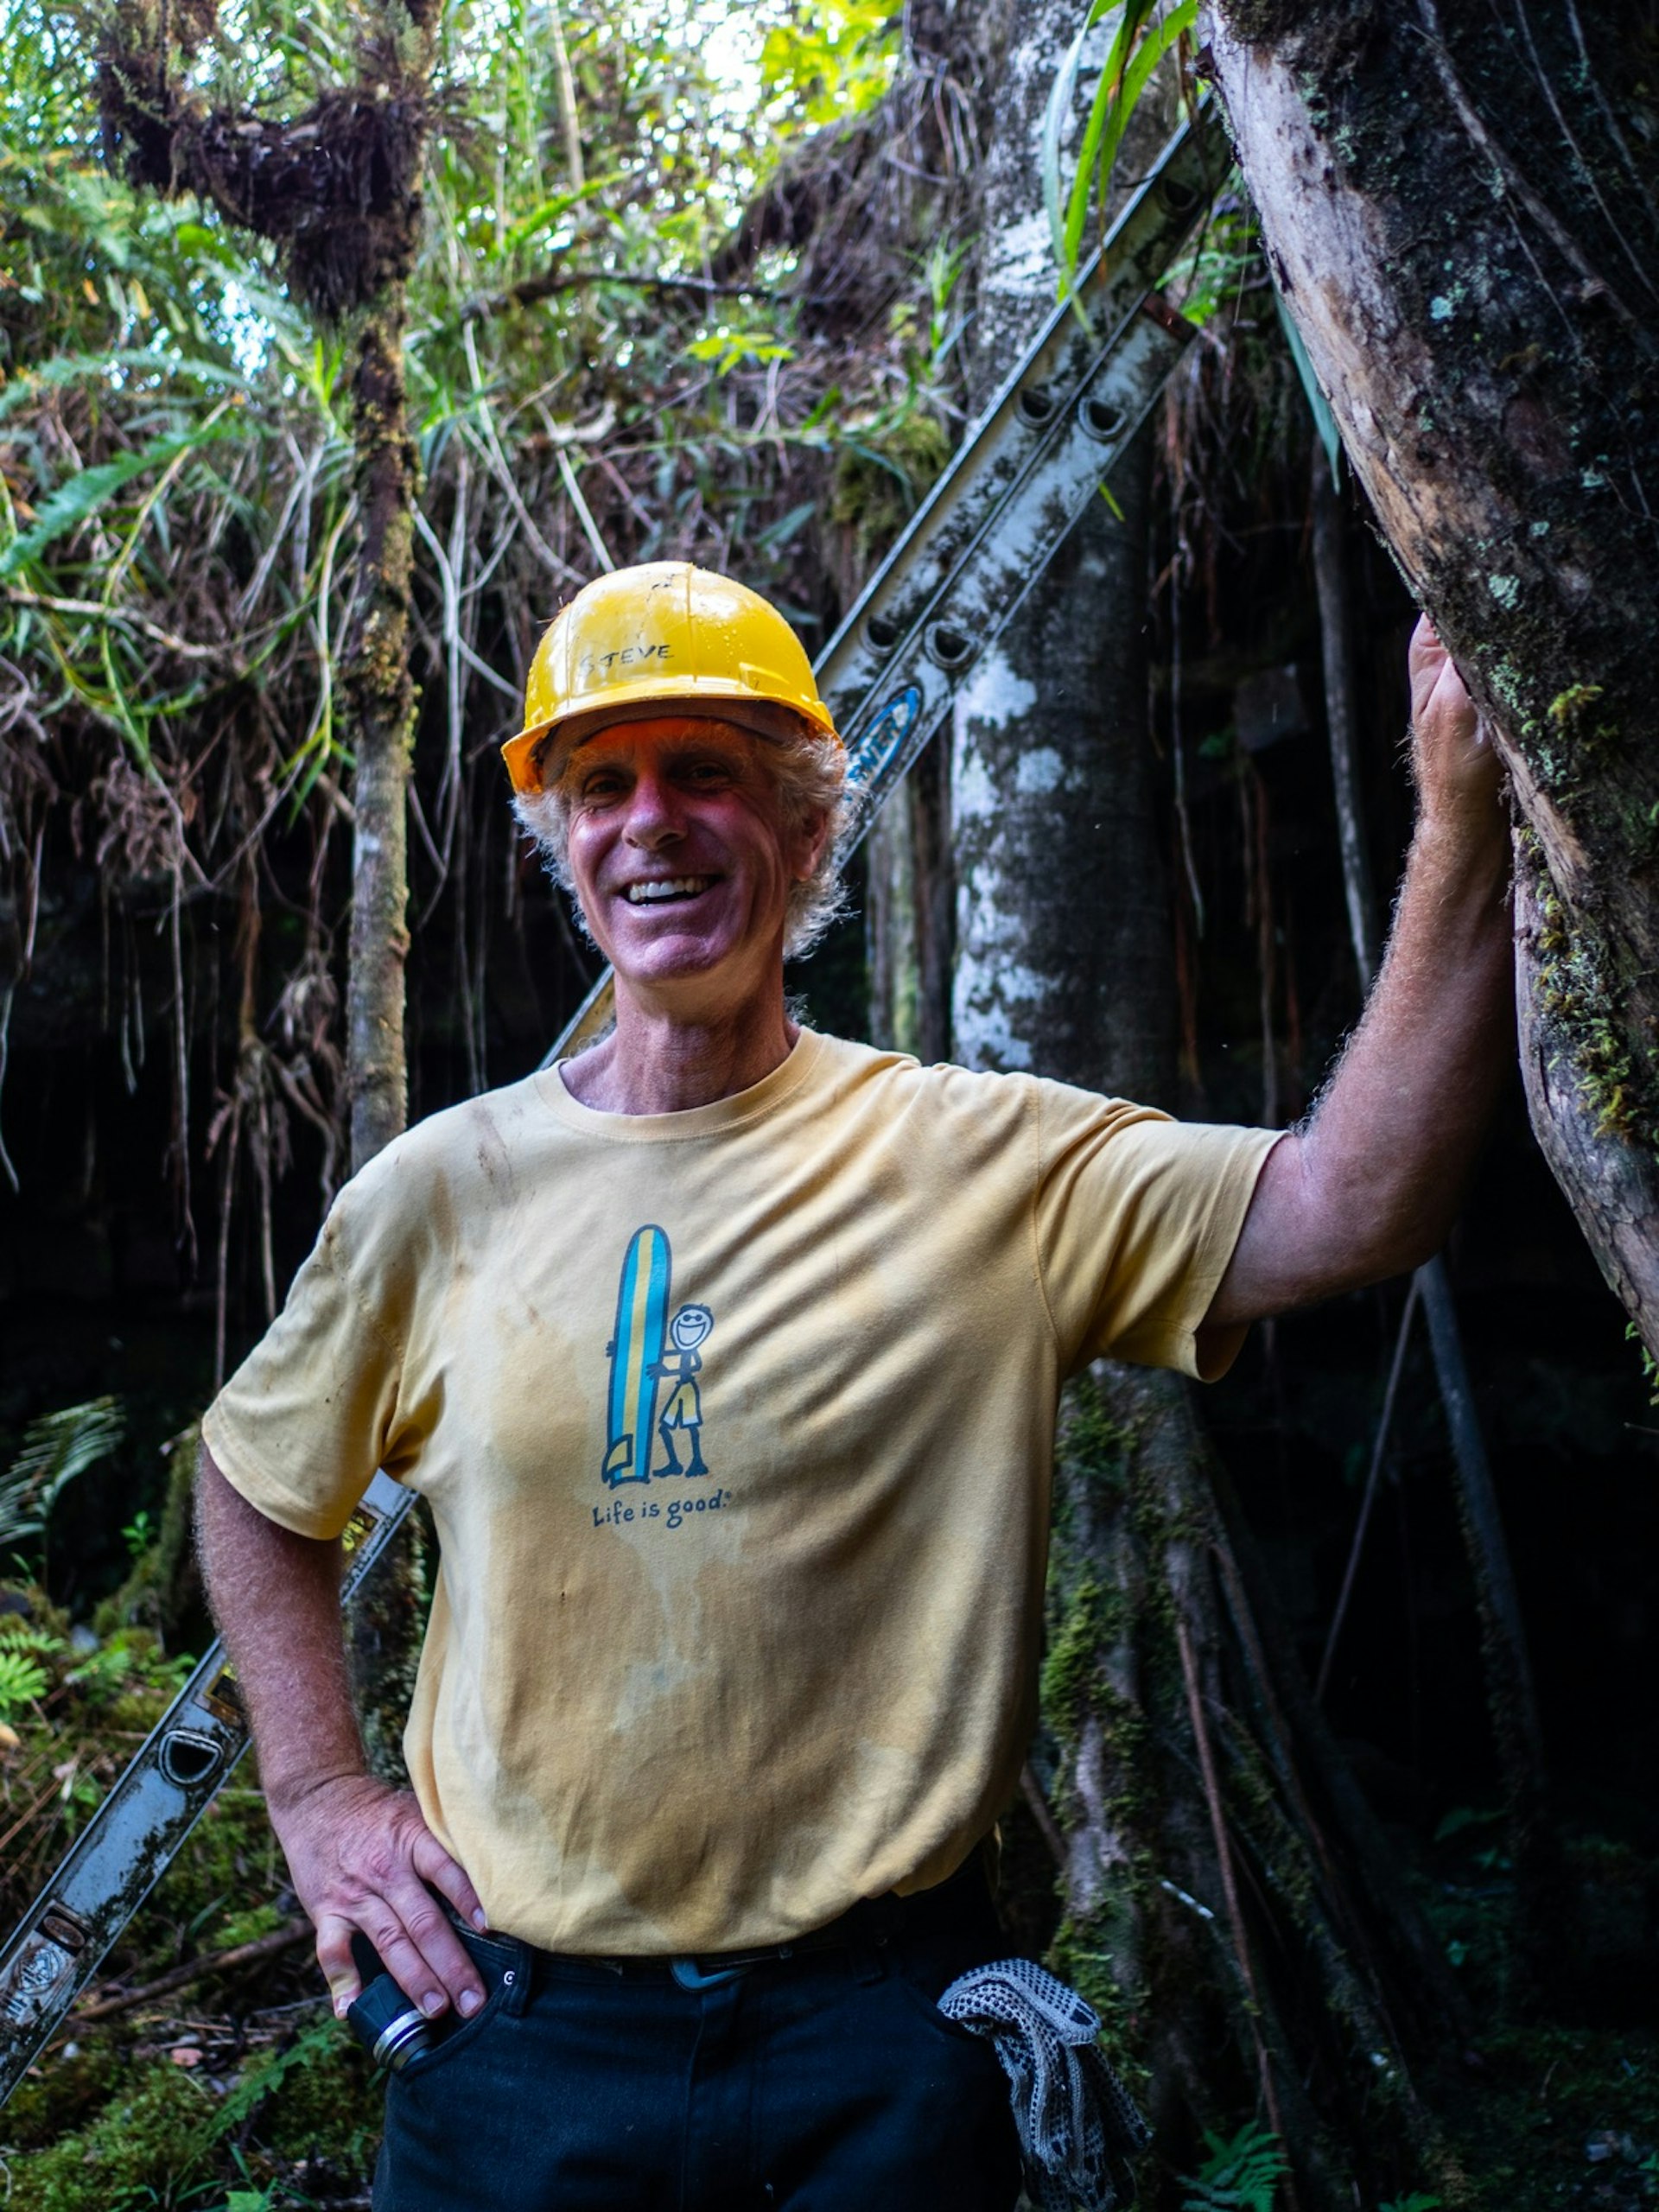 A smiling man with a yellow hard hat and a shirt that says life is good stands outside a cave entrance in the jungle